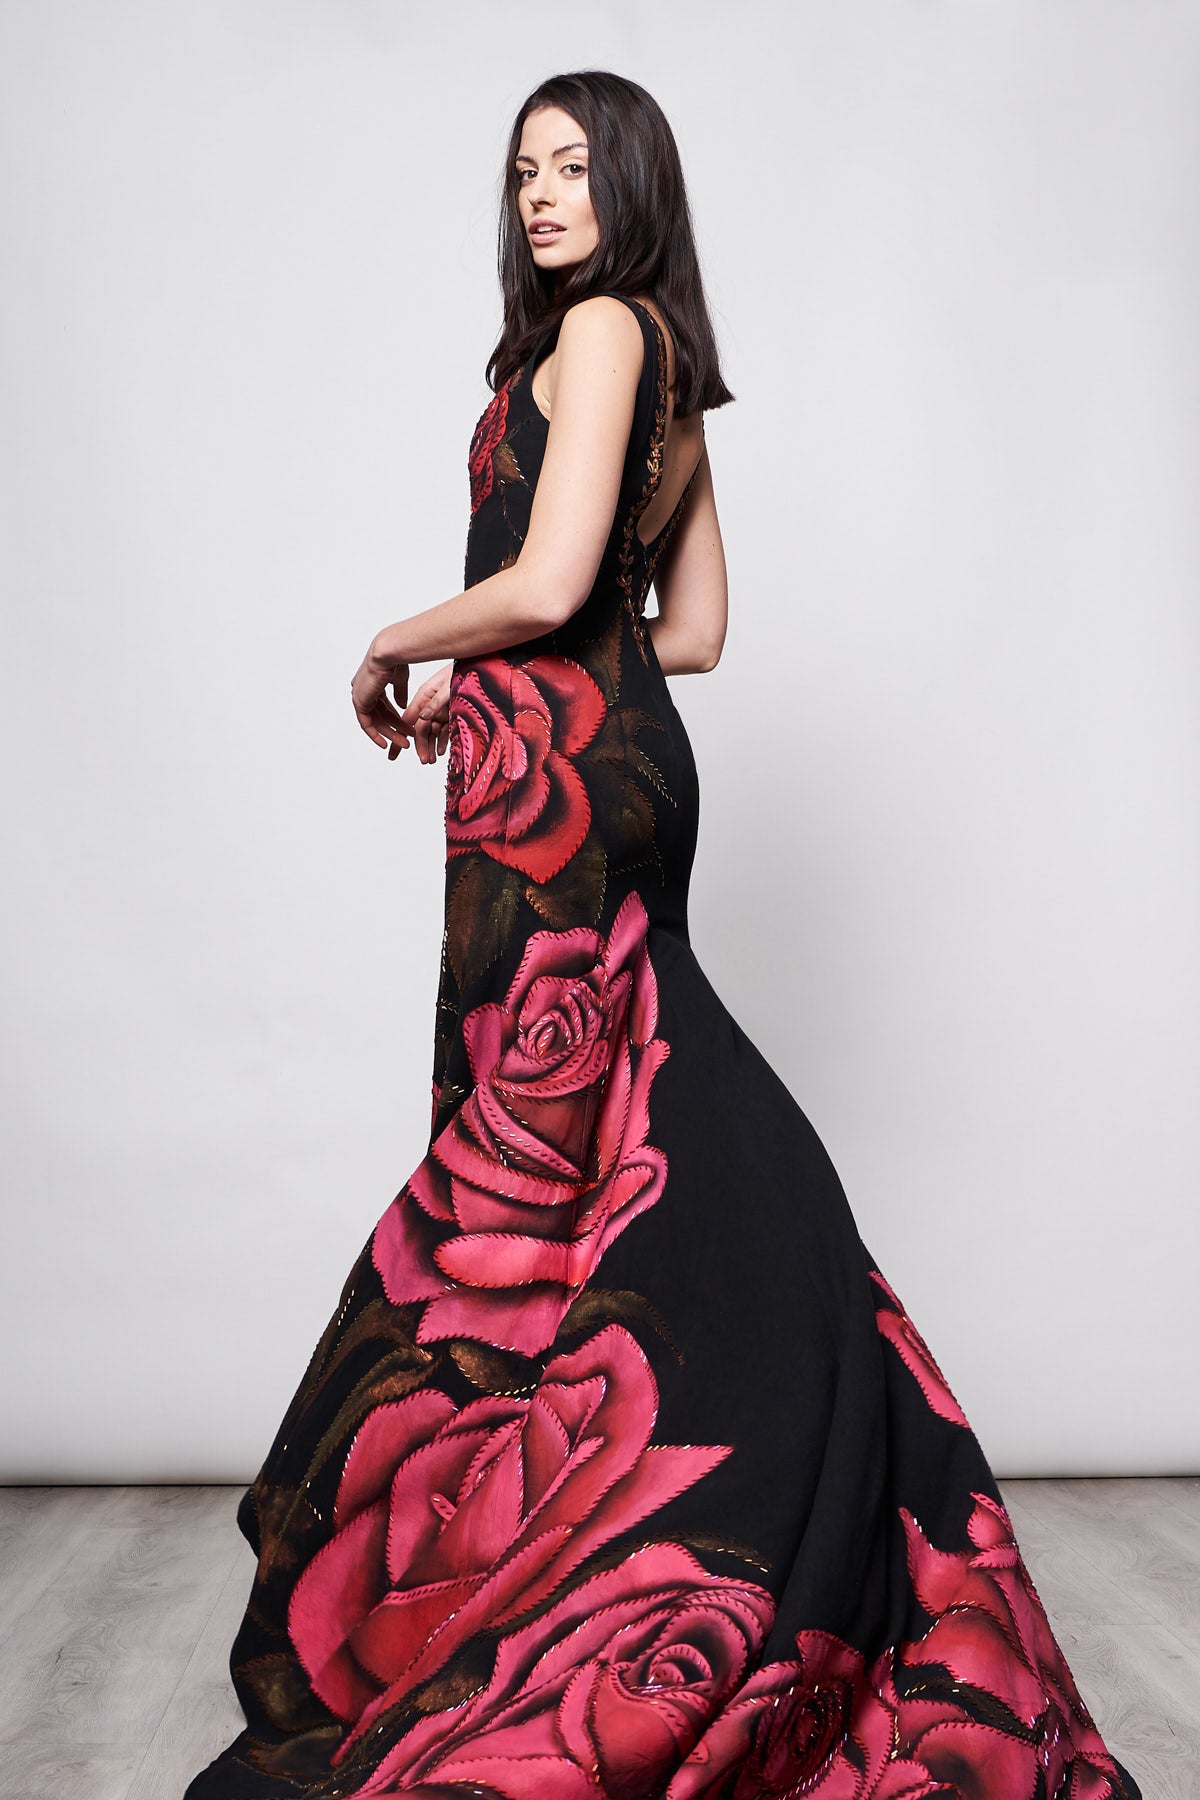 HAND-PAINTED AND HAND-EMBROIDERED WEDDING DRESS - ROSAS ROJAS